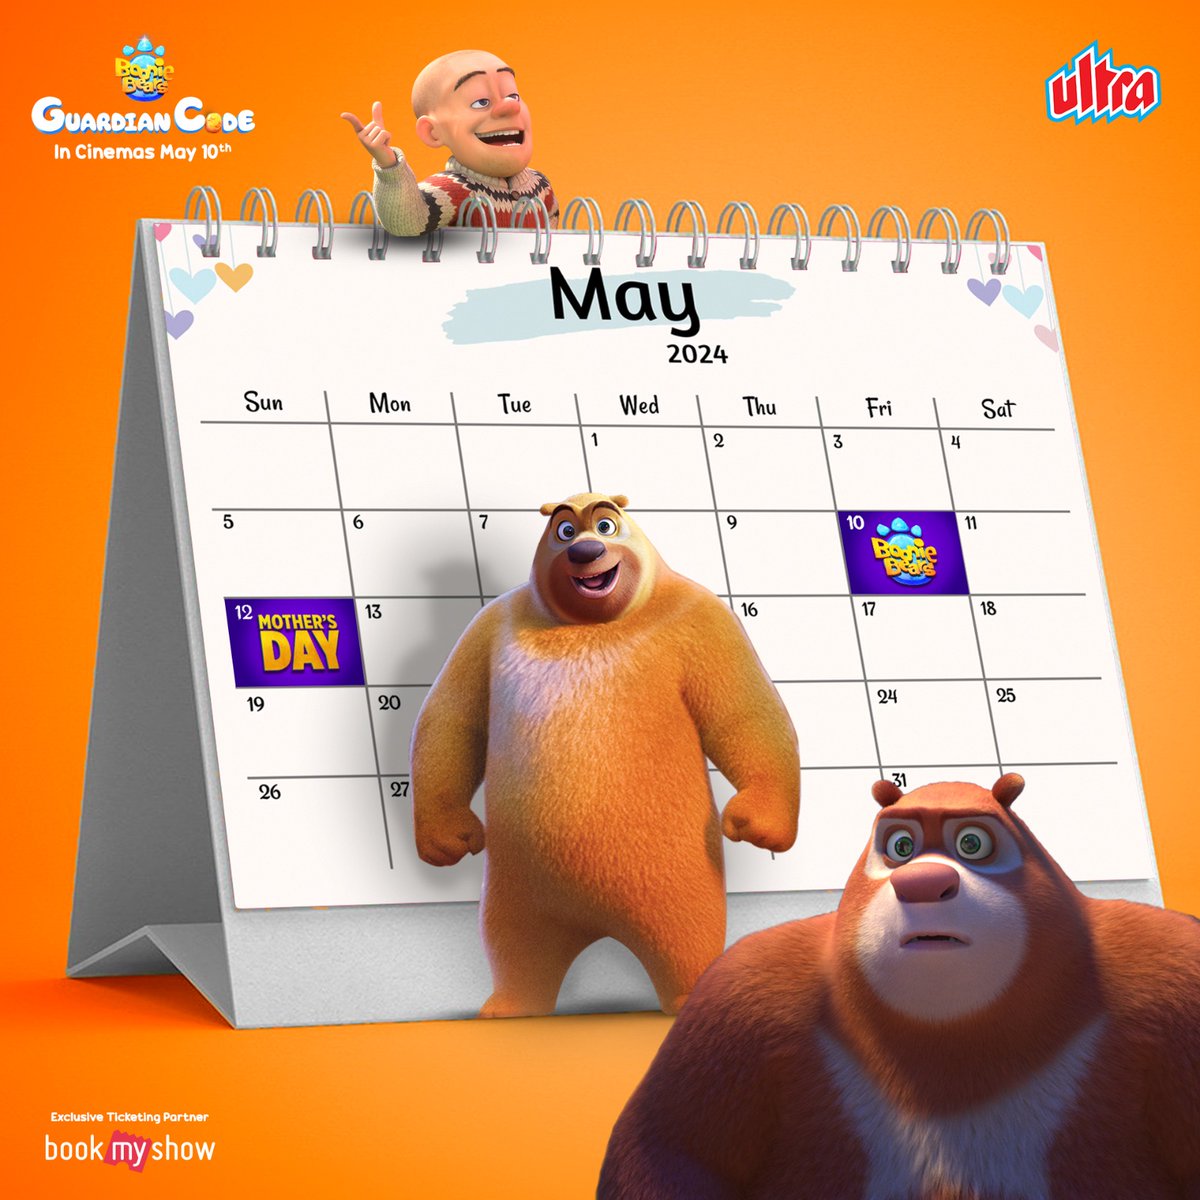 Double the Excitement this May! Stay tuned for the release of 'Boonie Bears' and a heartfelt occasion to honour those who make every day special. Watch #BoonieBears on May 10th, a Mother's Day special Releasing in English & Hindi #BoonieBears #StayTuned #NewMovie #MothersDay